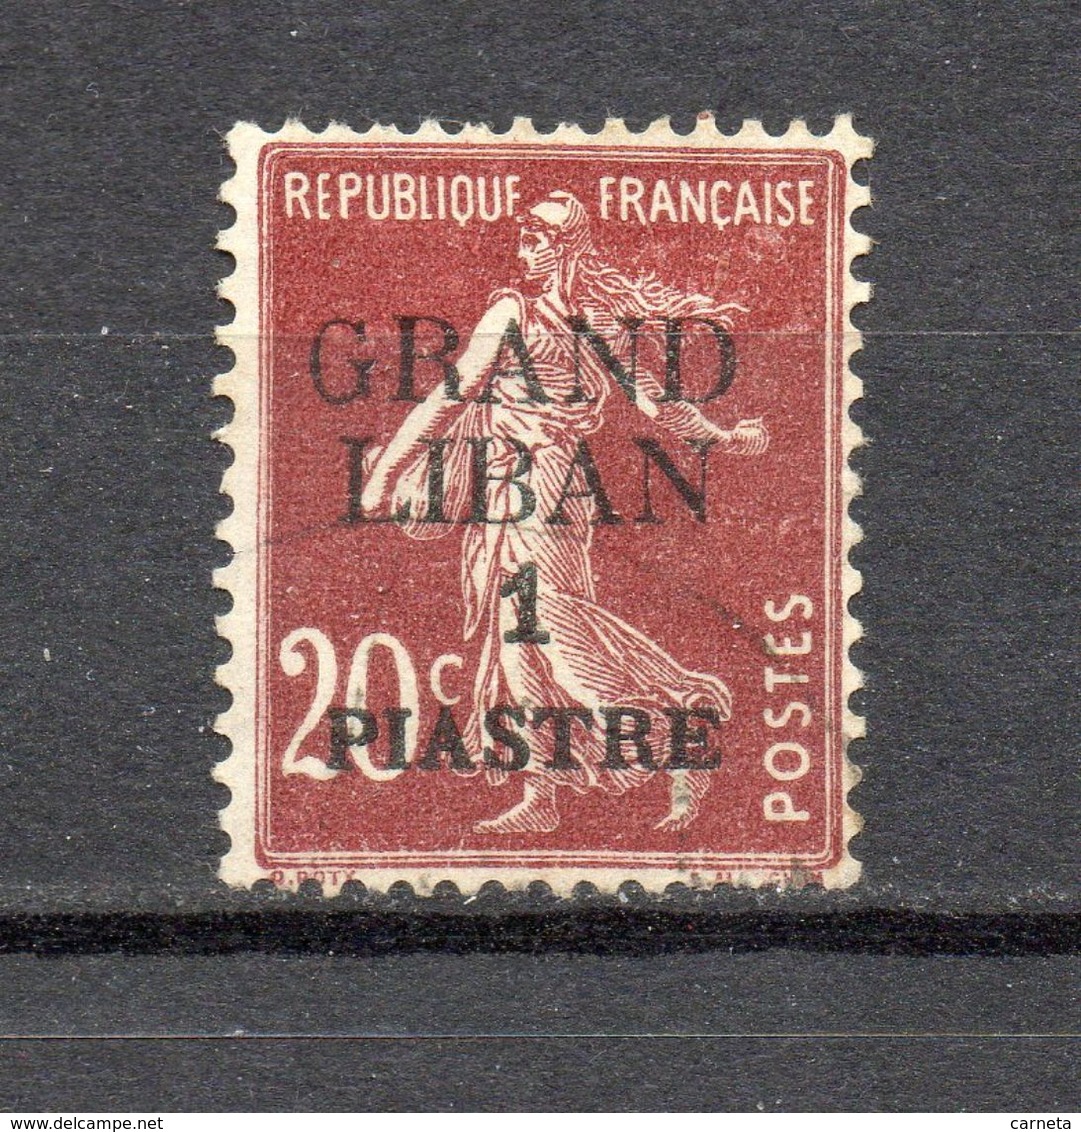 GRAND LIBAN  N° 5   OBLITERE COTE 1.50€  TYPE SEMEUSE - Used Stamps